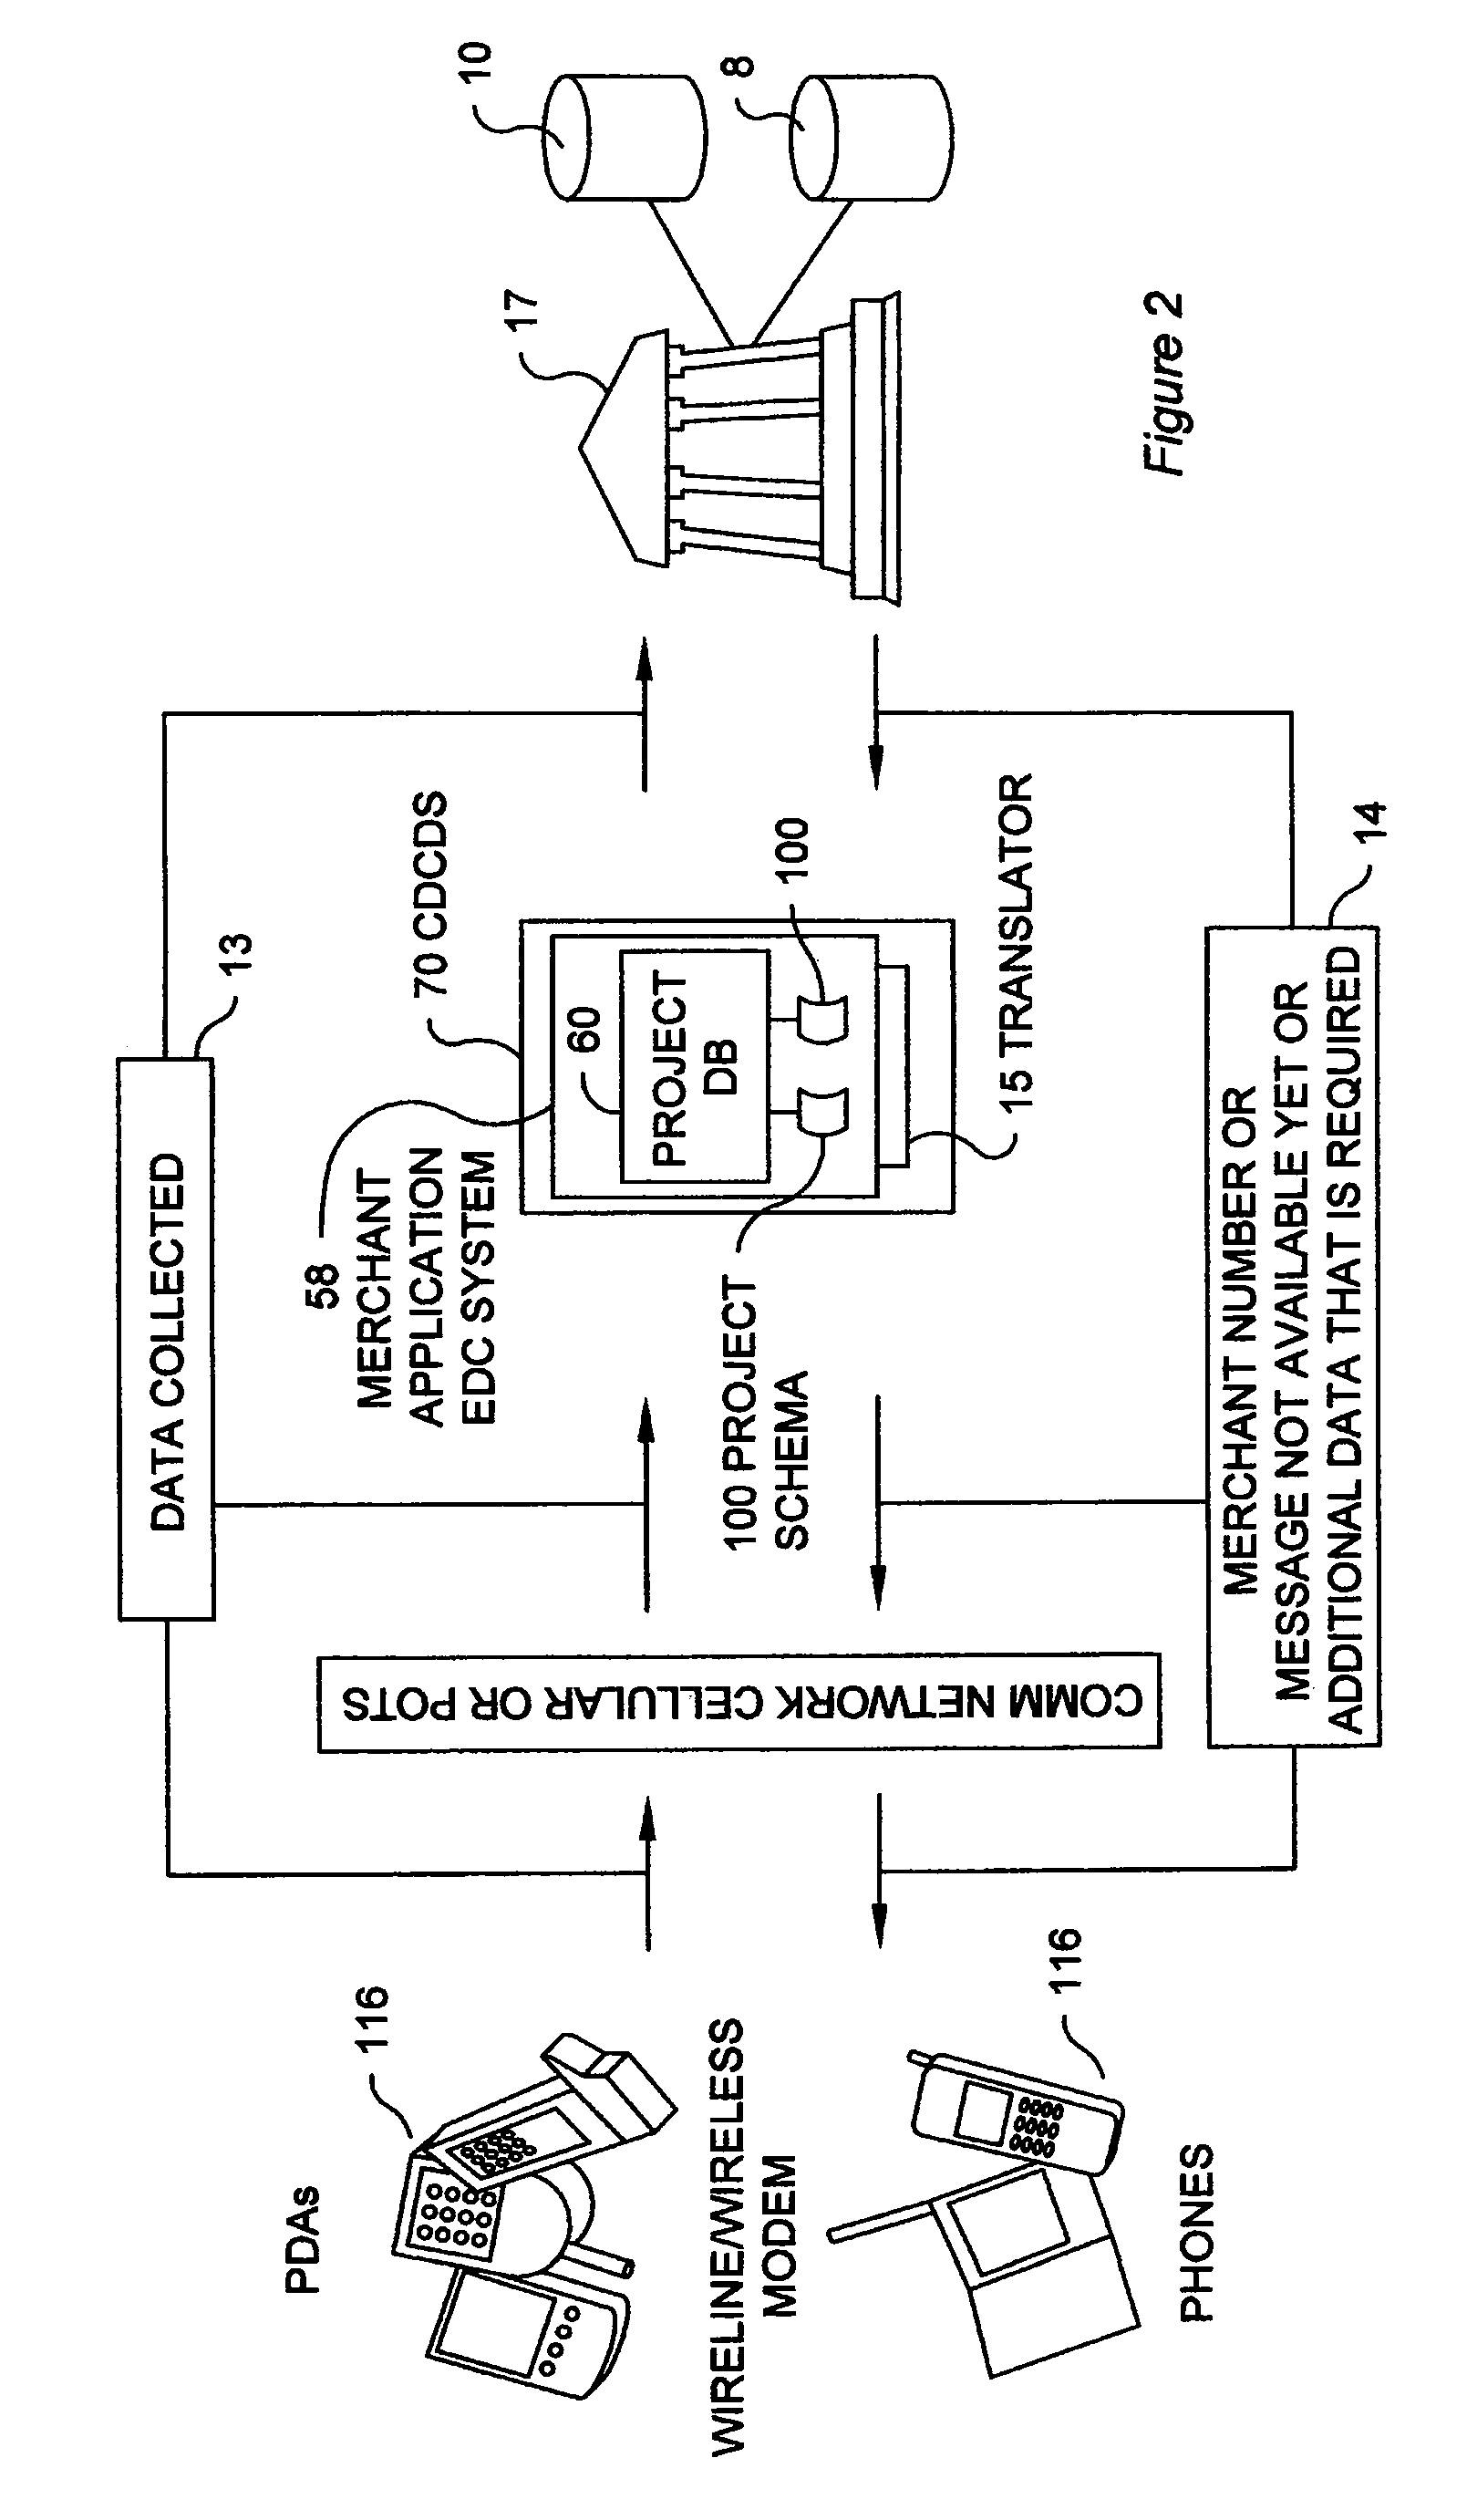 System and method for mobile wireless electronic data capture and distribution of a merchant card-processing application